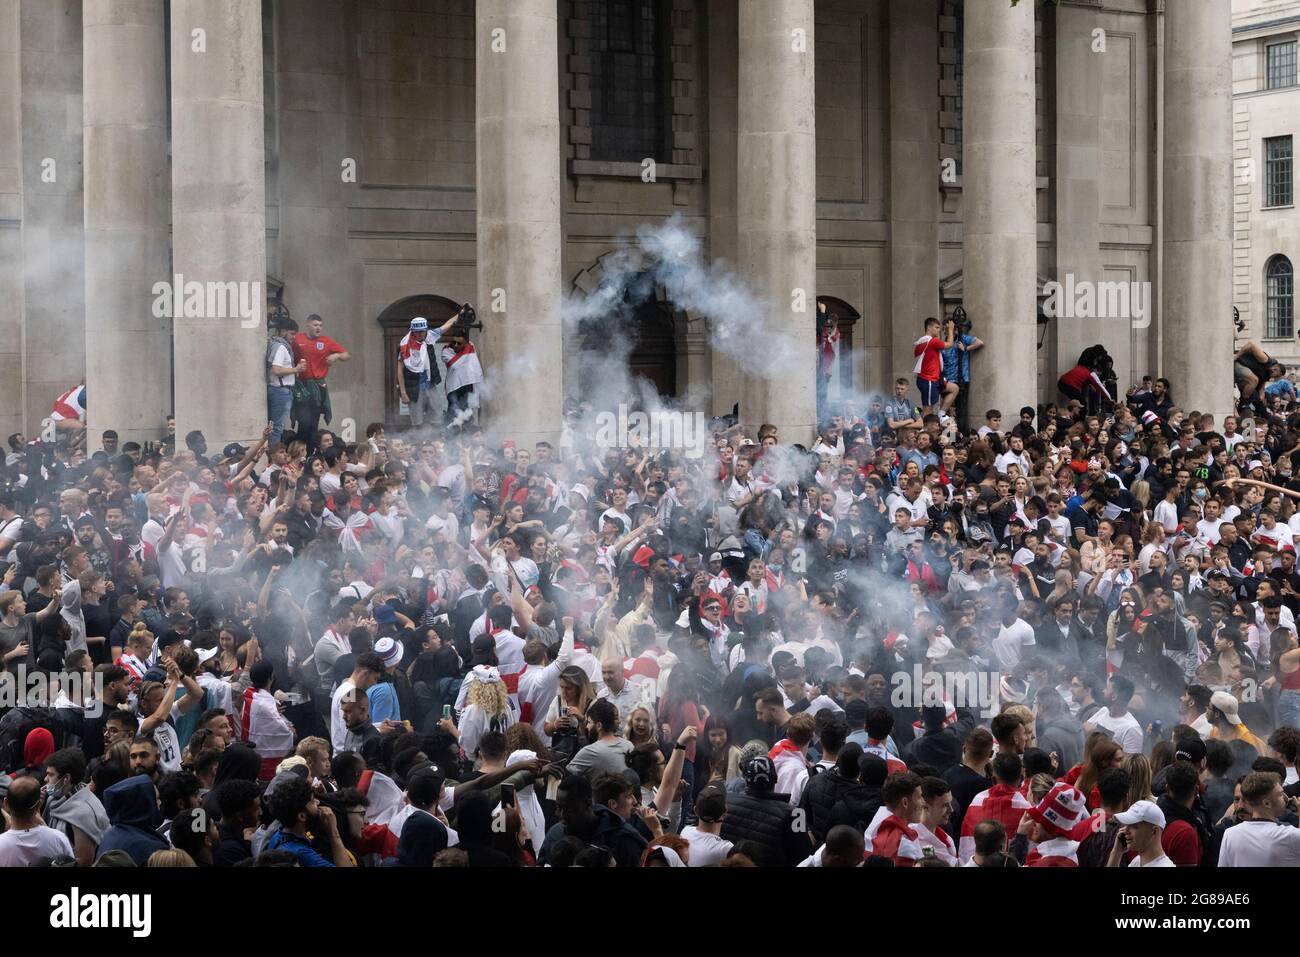 Crowd of English fans outside fan zone during the England vs Italy Euro 2020 final, Trafalgar Square, London, 11 July 2021 Stock Photo